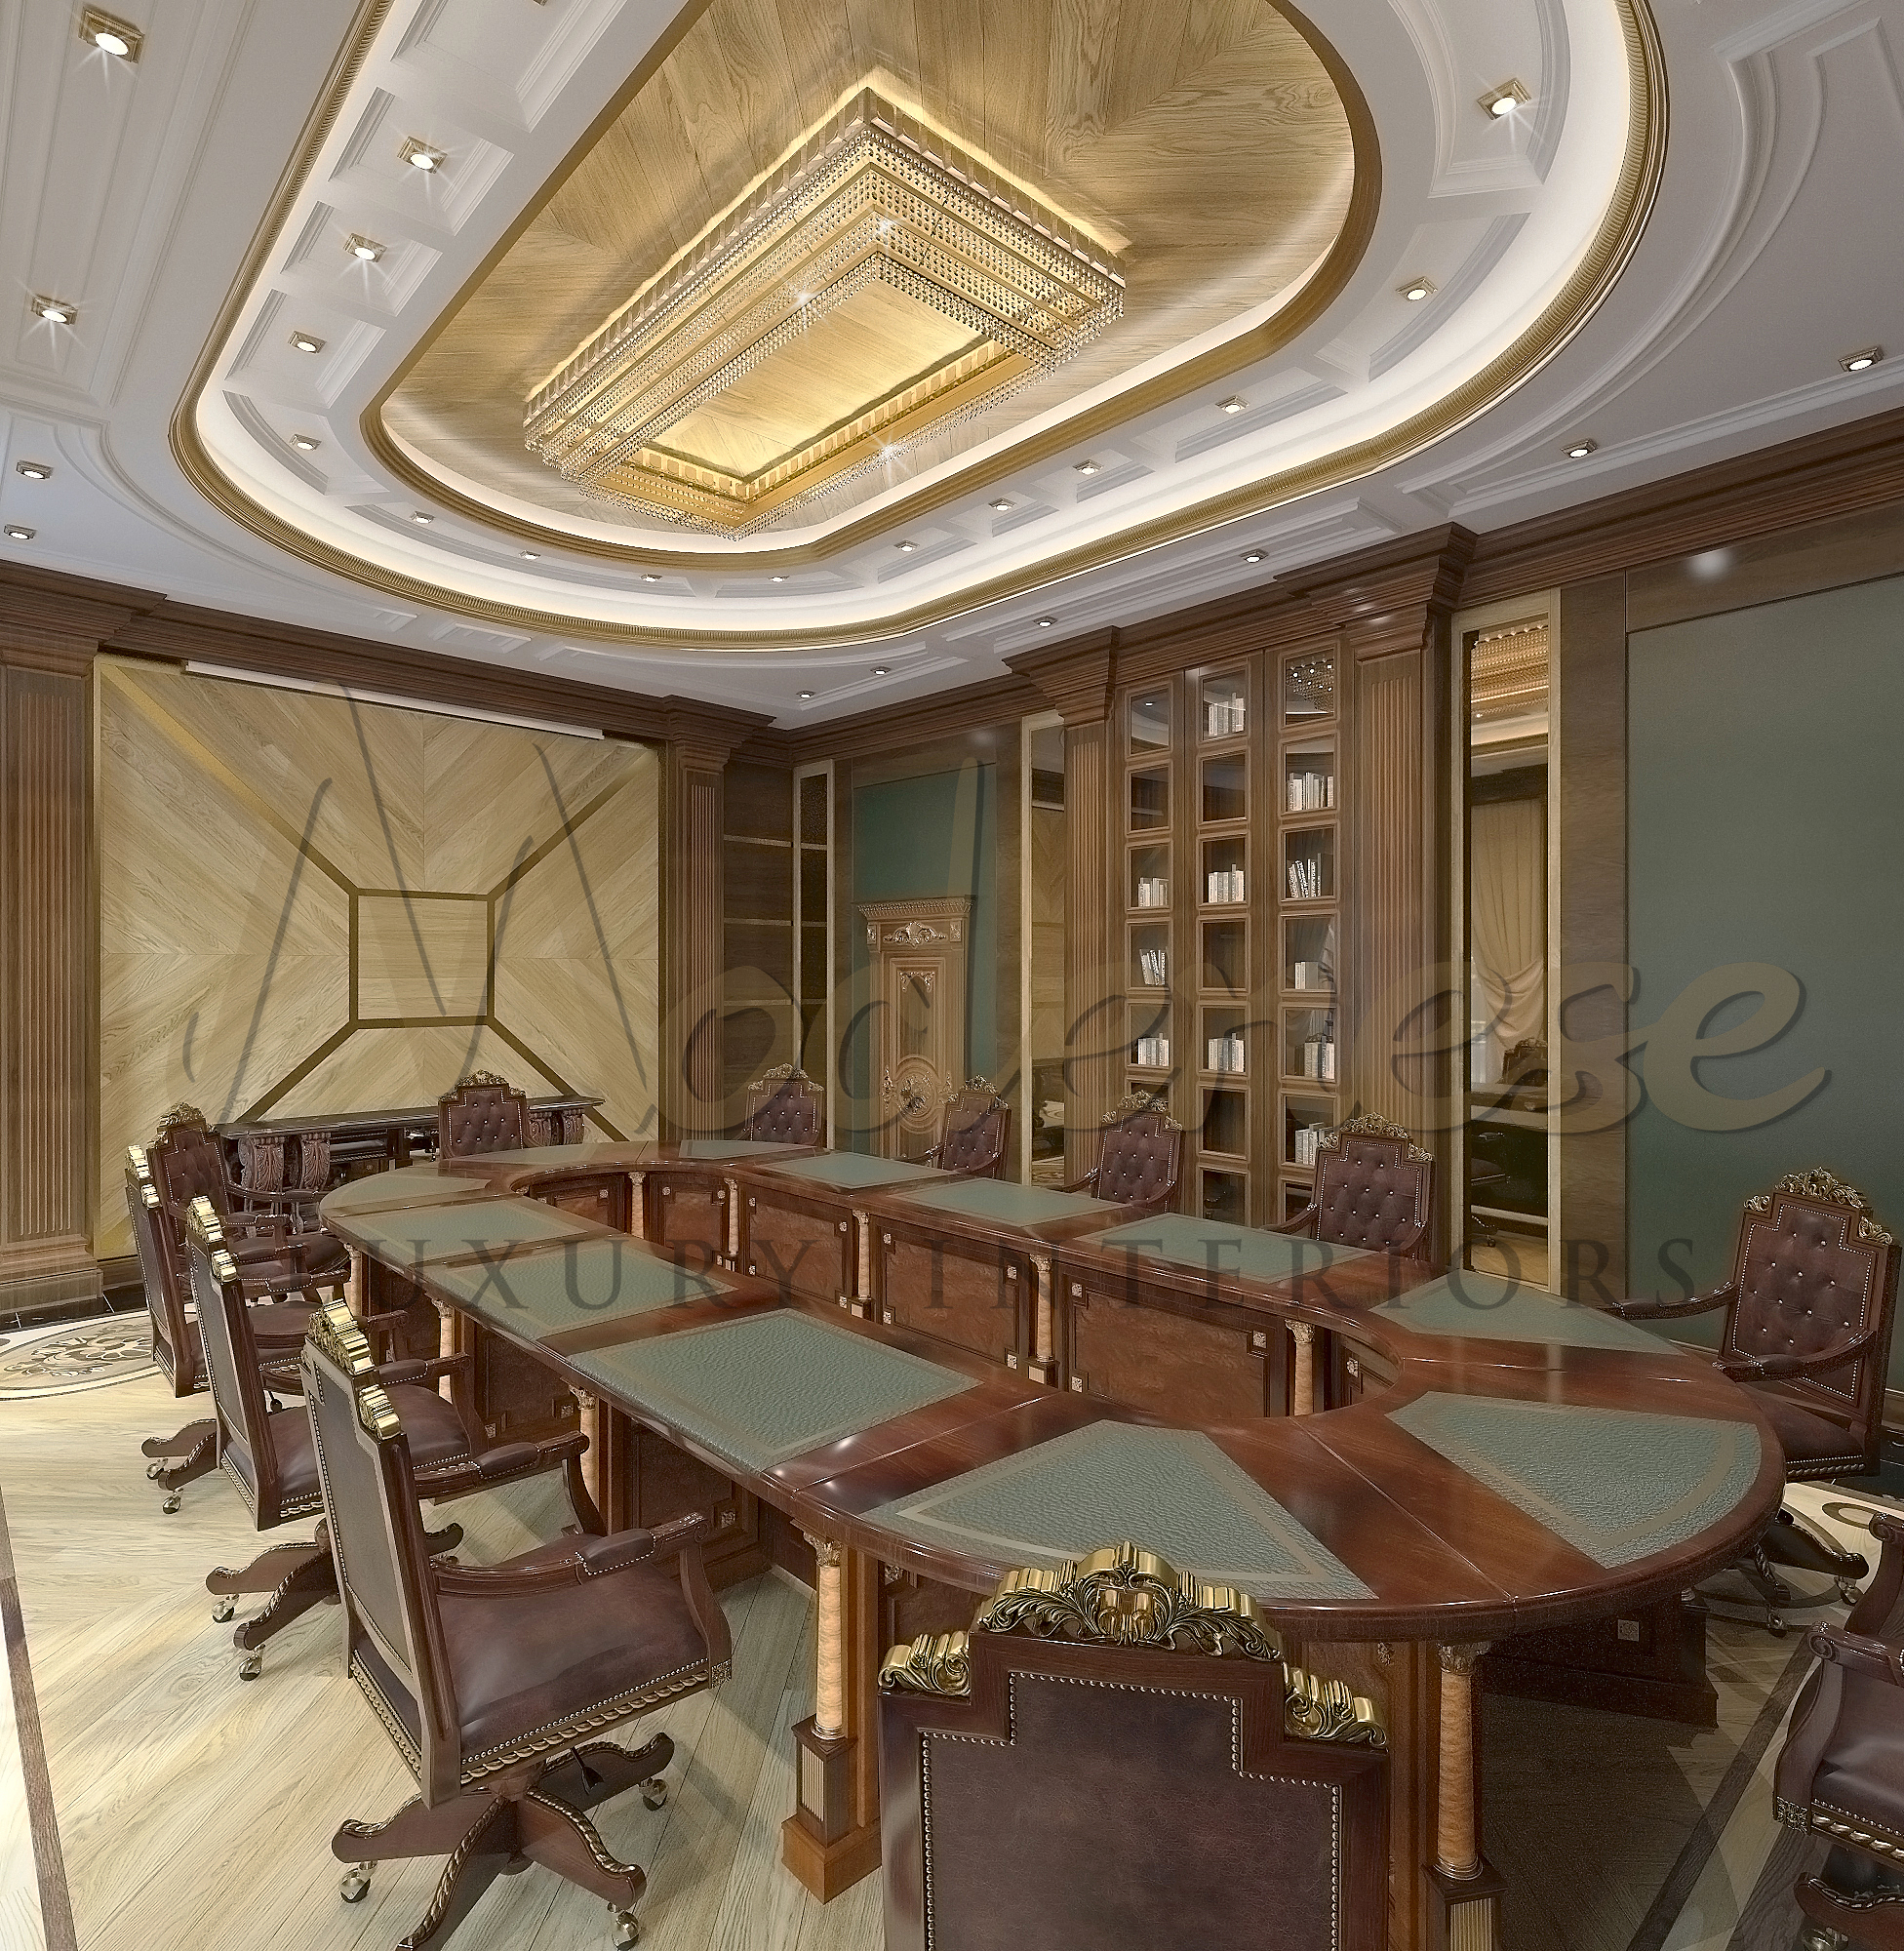 best joinery service,luxury office design, meeting room,top quality and bespoke handmade products in solid wood, artisanal furniture manufacturer,top interior design company in the world, high-quality furniture for office project